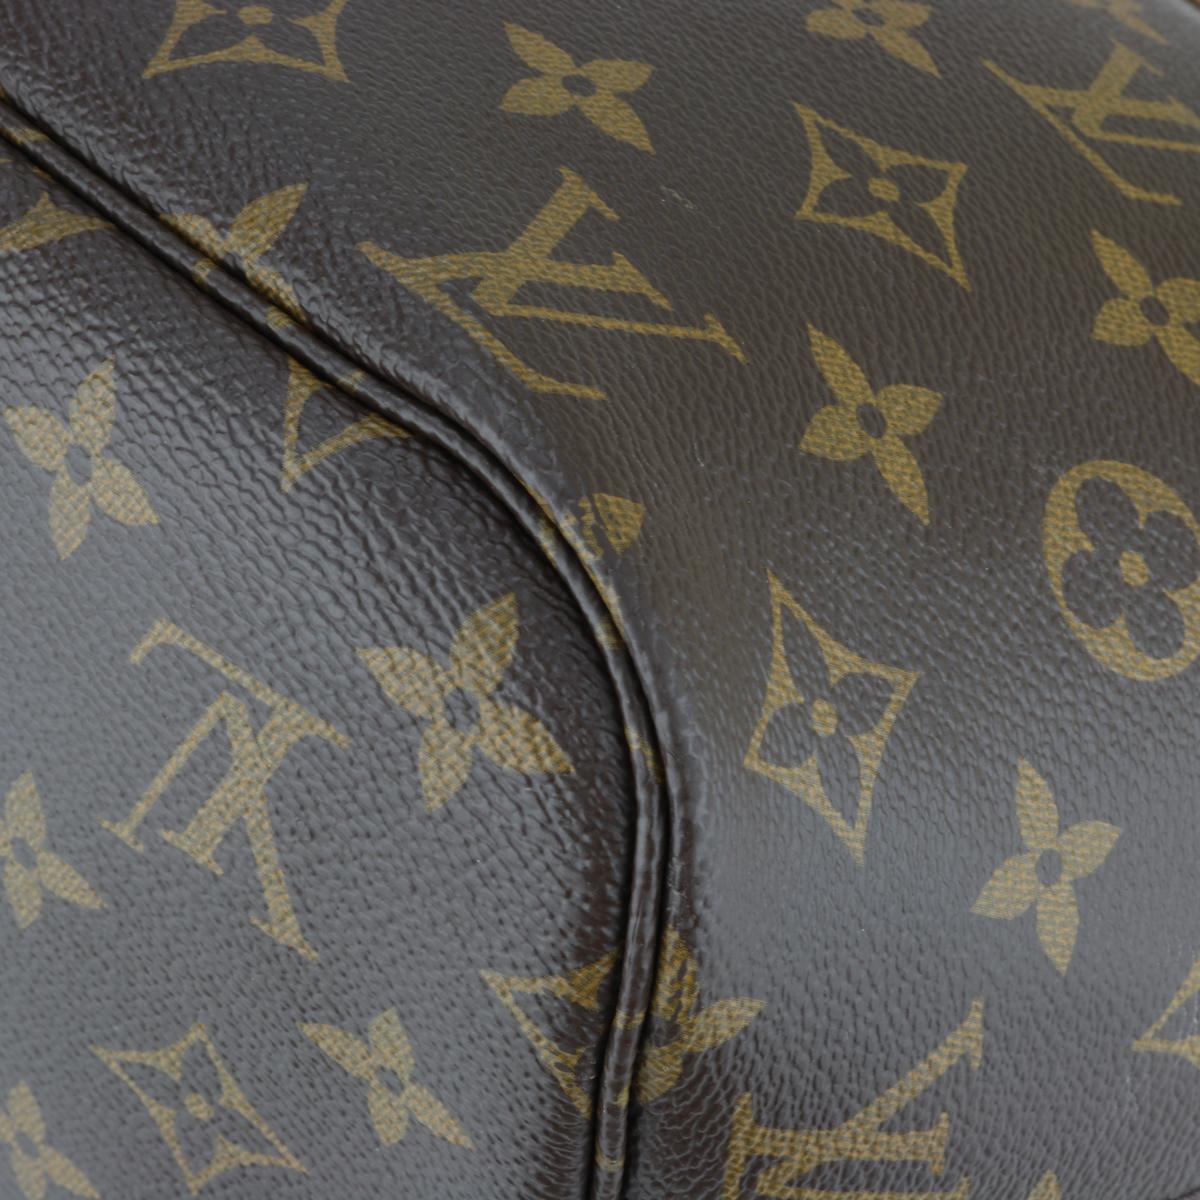 Louis Vuitton Neverfull MM Bag in Monogram with Beige Interior 2016 3